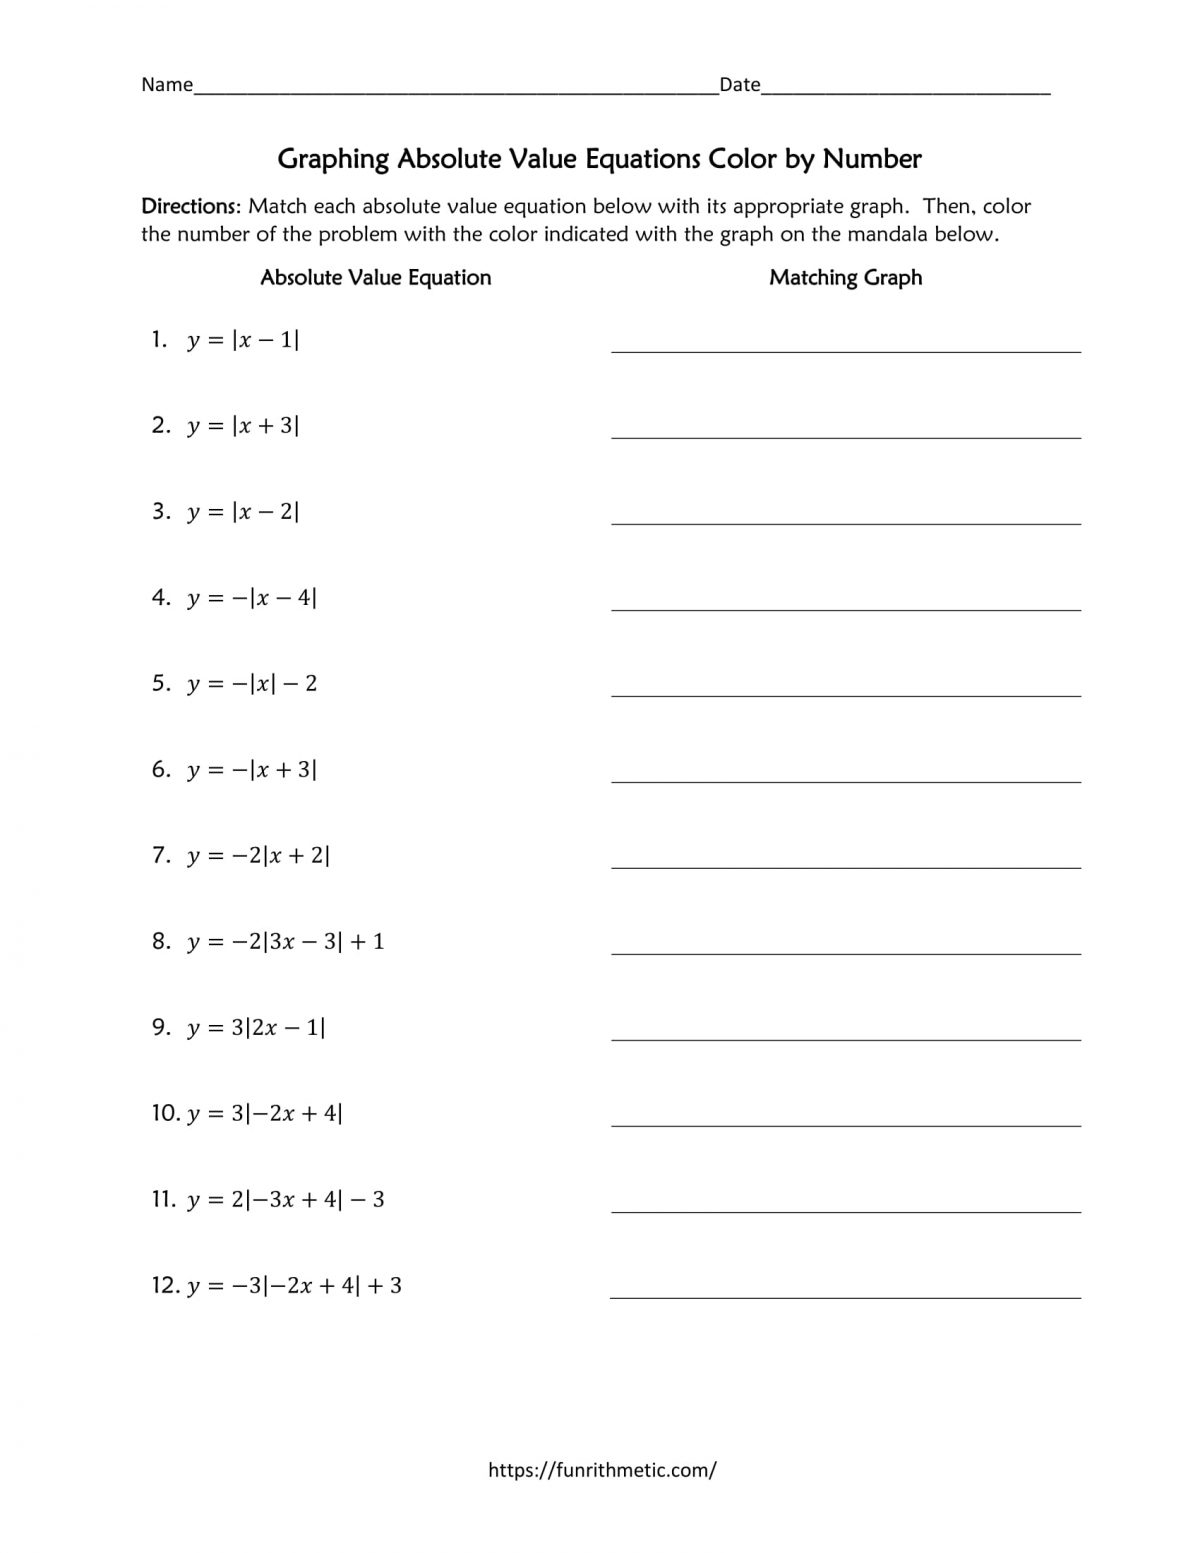 Graphing Absolute Value Equations worksheet